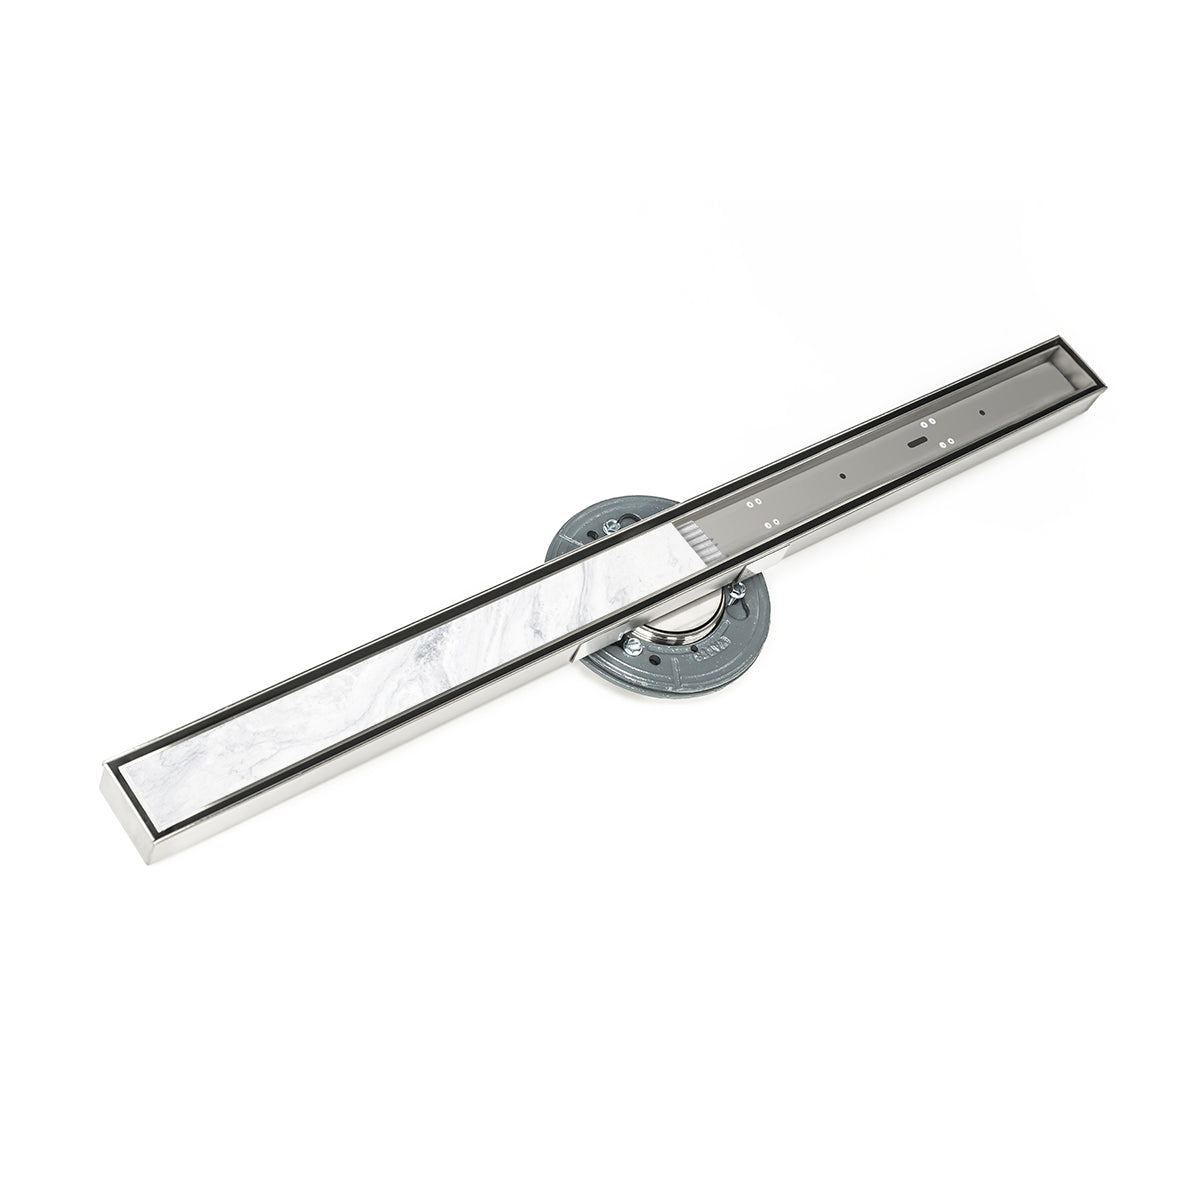 Infinity Drain 96" S-Stainless Steel Series High Flow Site Sizable Linear Drain Kit with Tile Insert Frame with ABS Drain Body, 3" Outlet